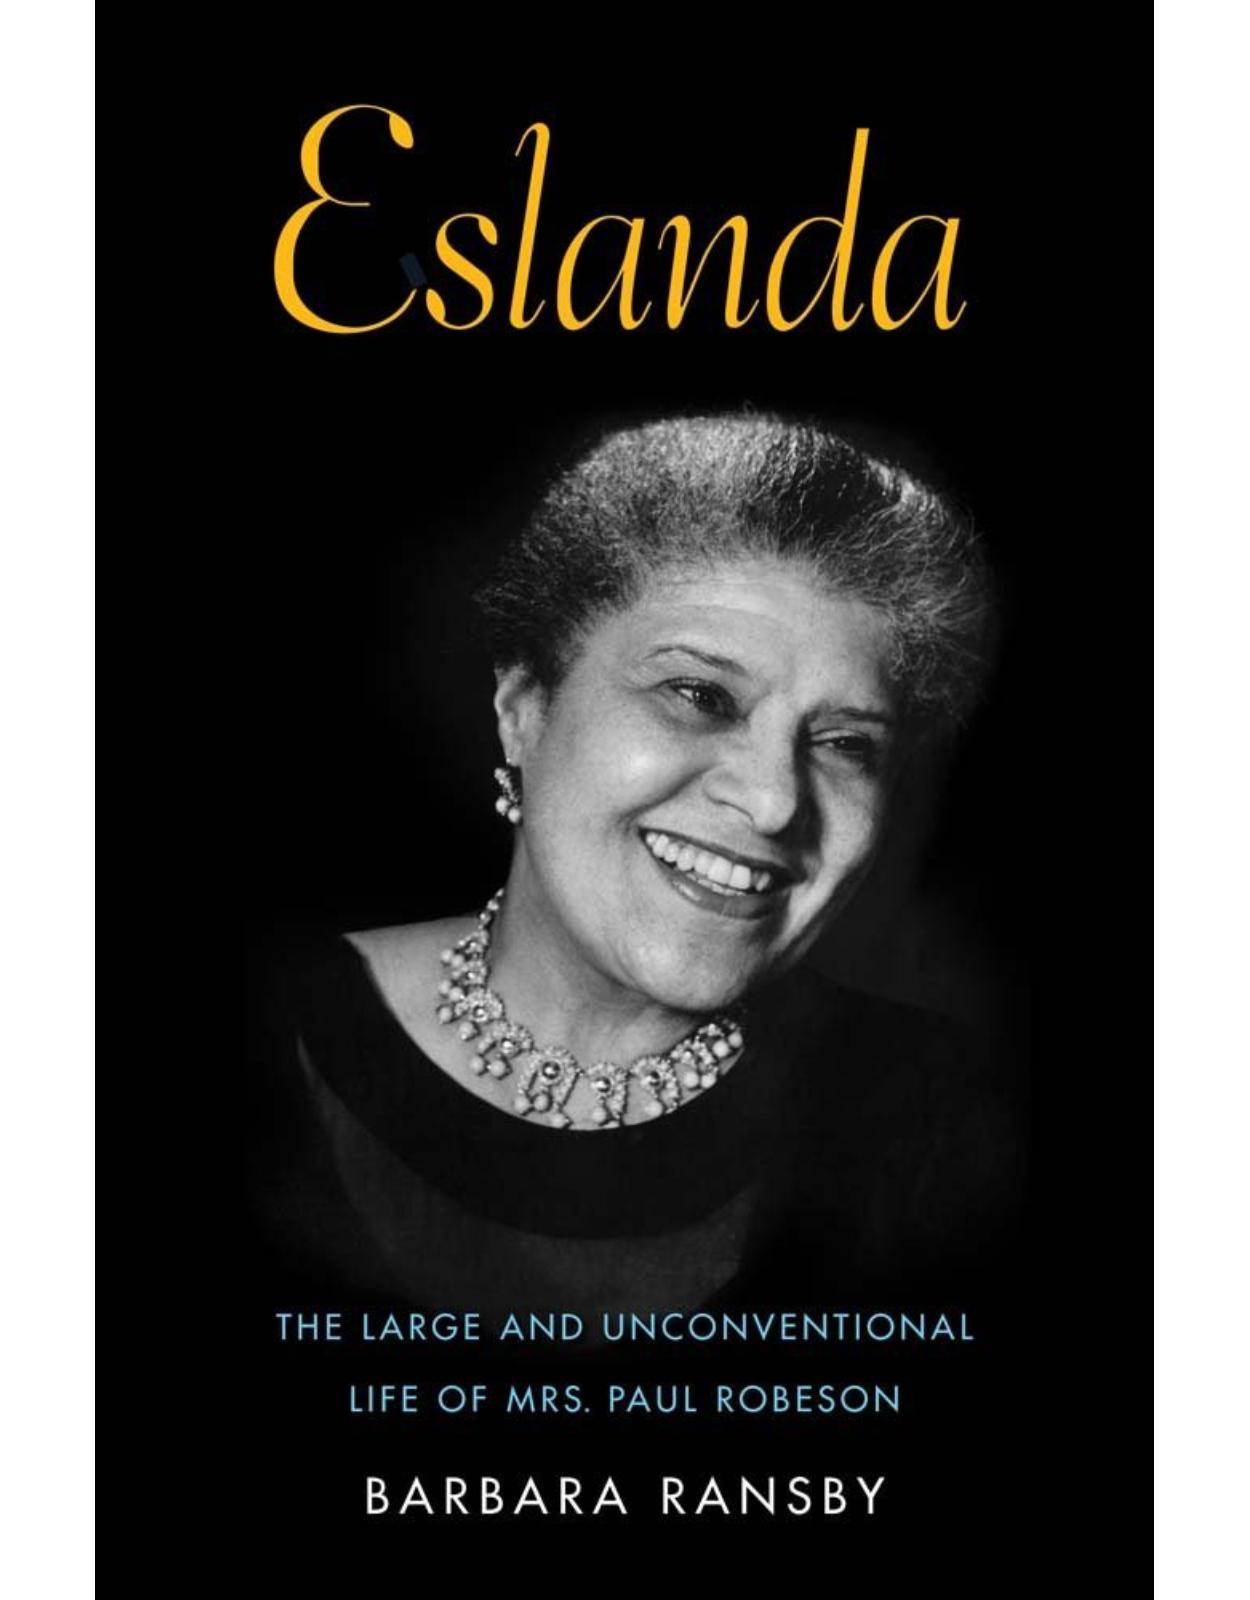 Eslanda. The Large and Unconventional Life of Mrs. Paul Robeson